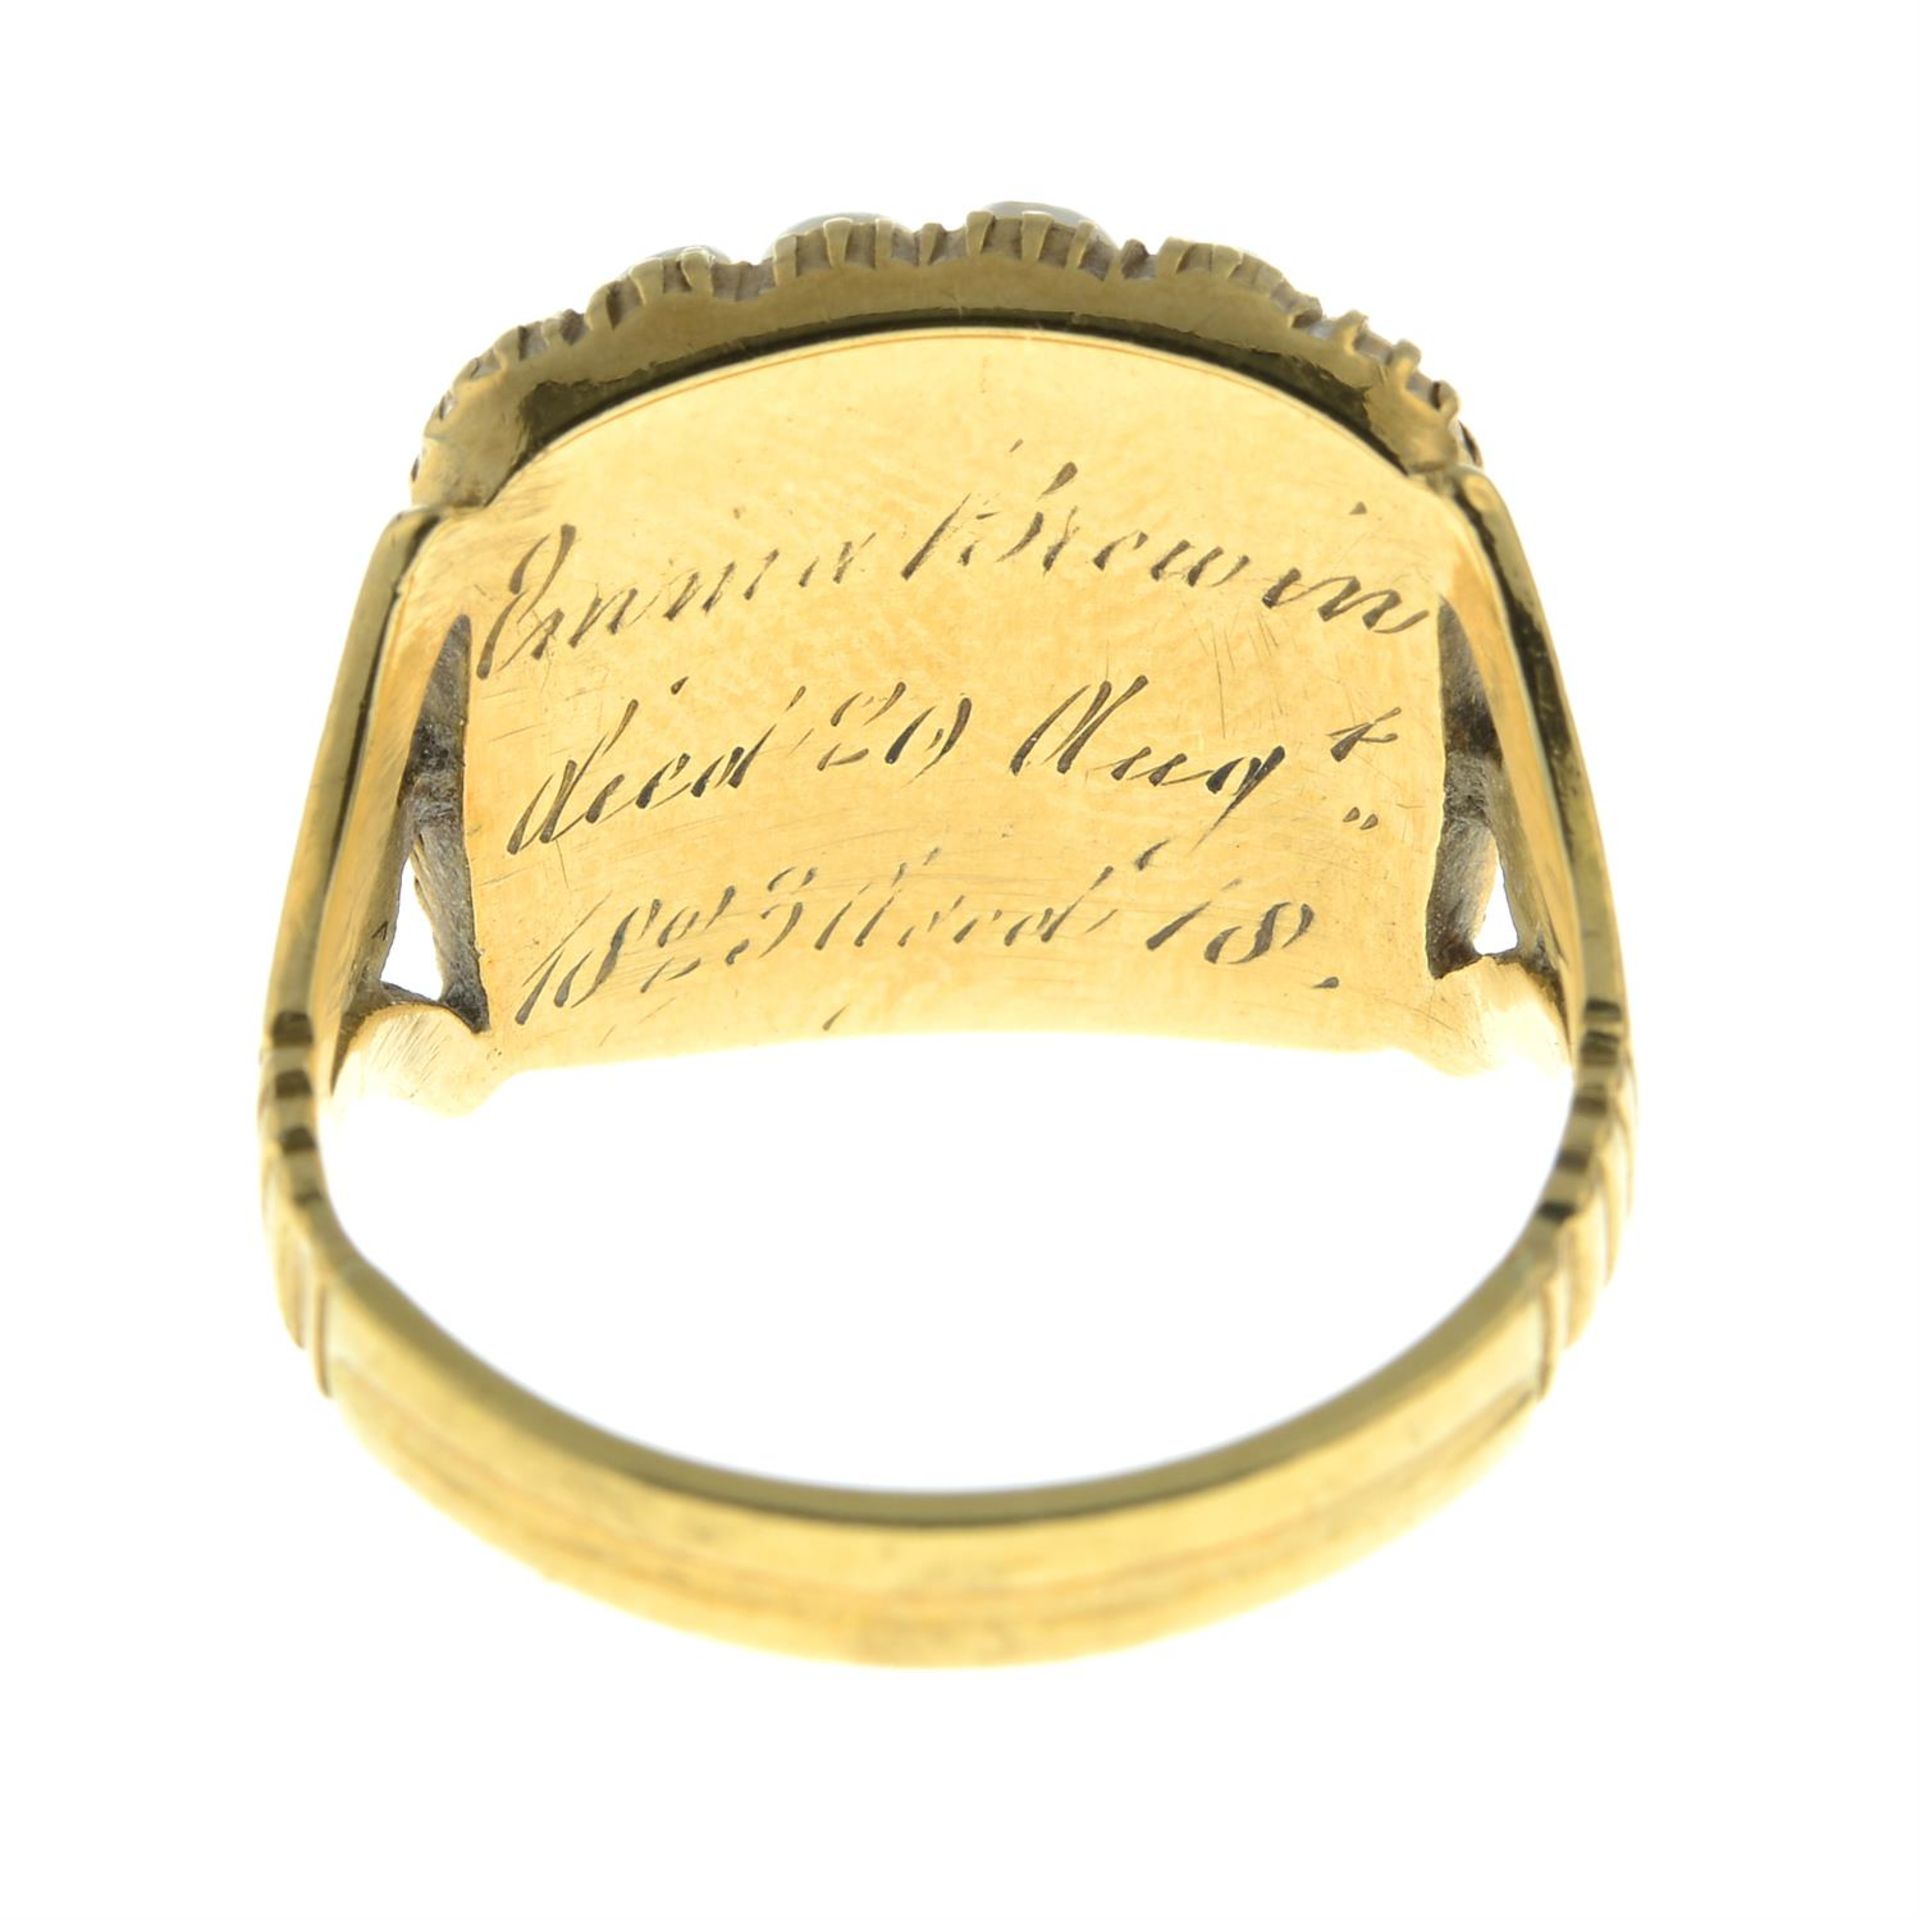 A late Georgian 18ct gold glazed woven hair memorial ring, with black enamel and split pearl - Image 4 of 5